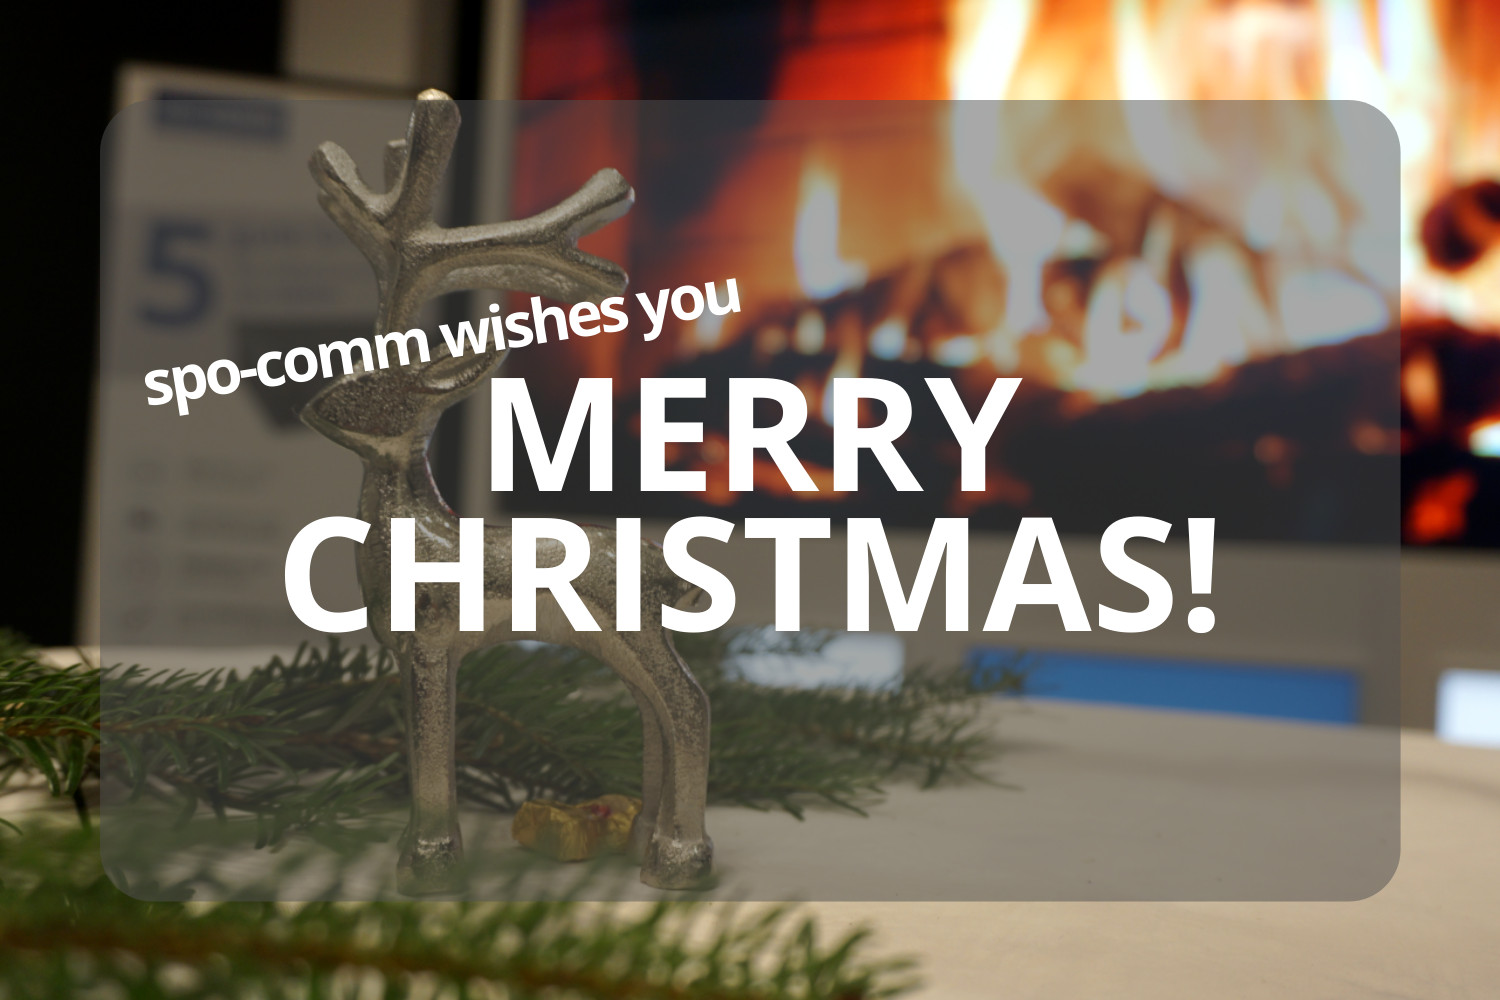 spo-comm wishes you a merry christmas 2019